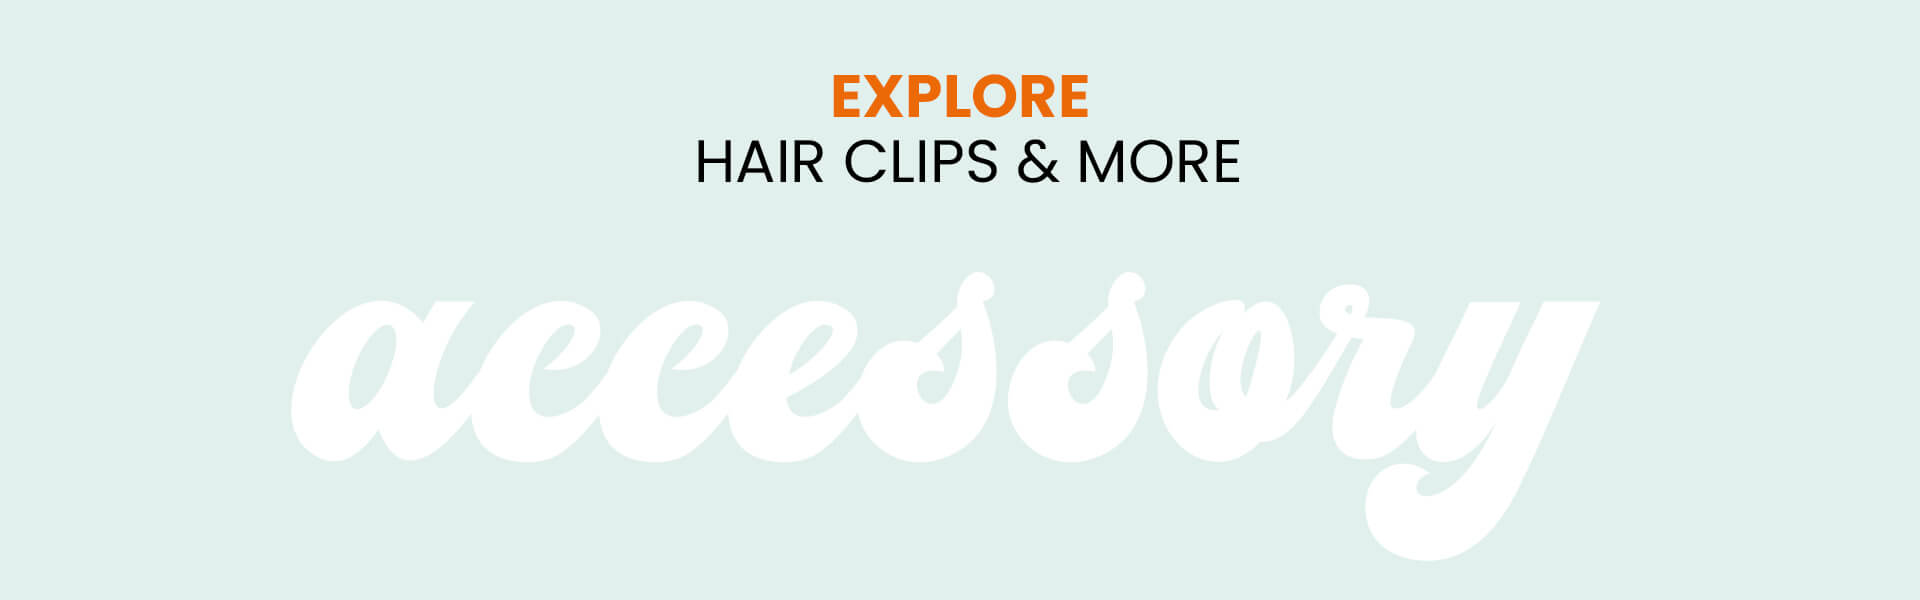 explore hair clips & more - accessory